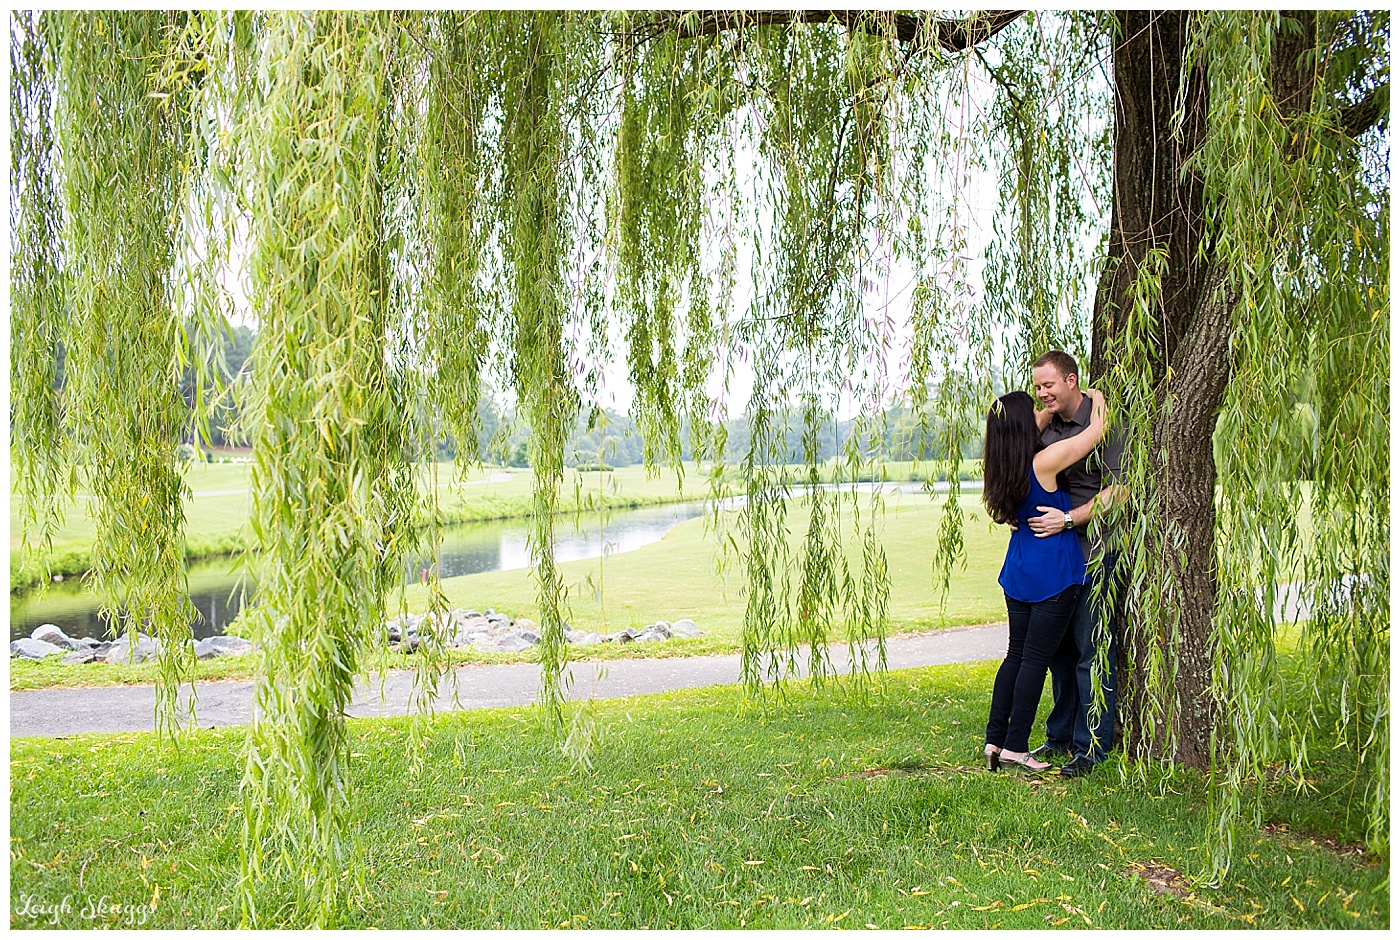 Amanda & Billy are Engaged!  Their Fords Colony Country Club Williamsburg Virginia Engagement session!